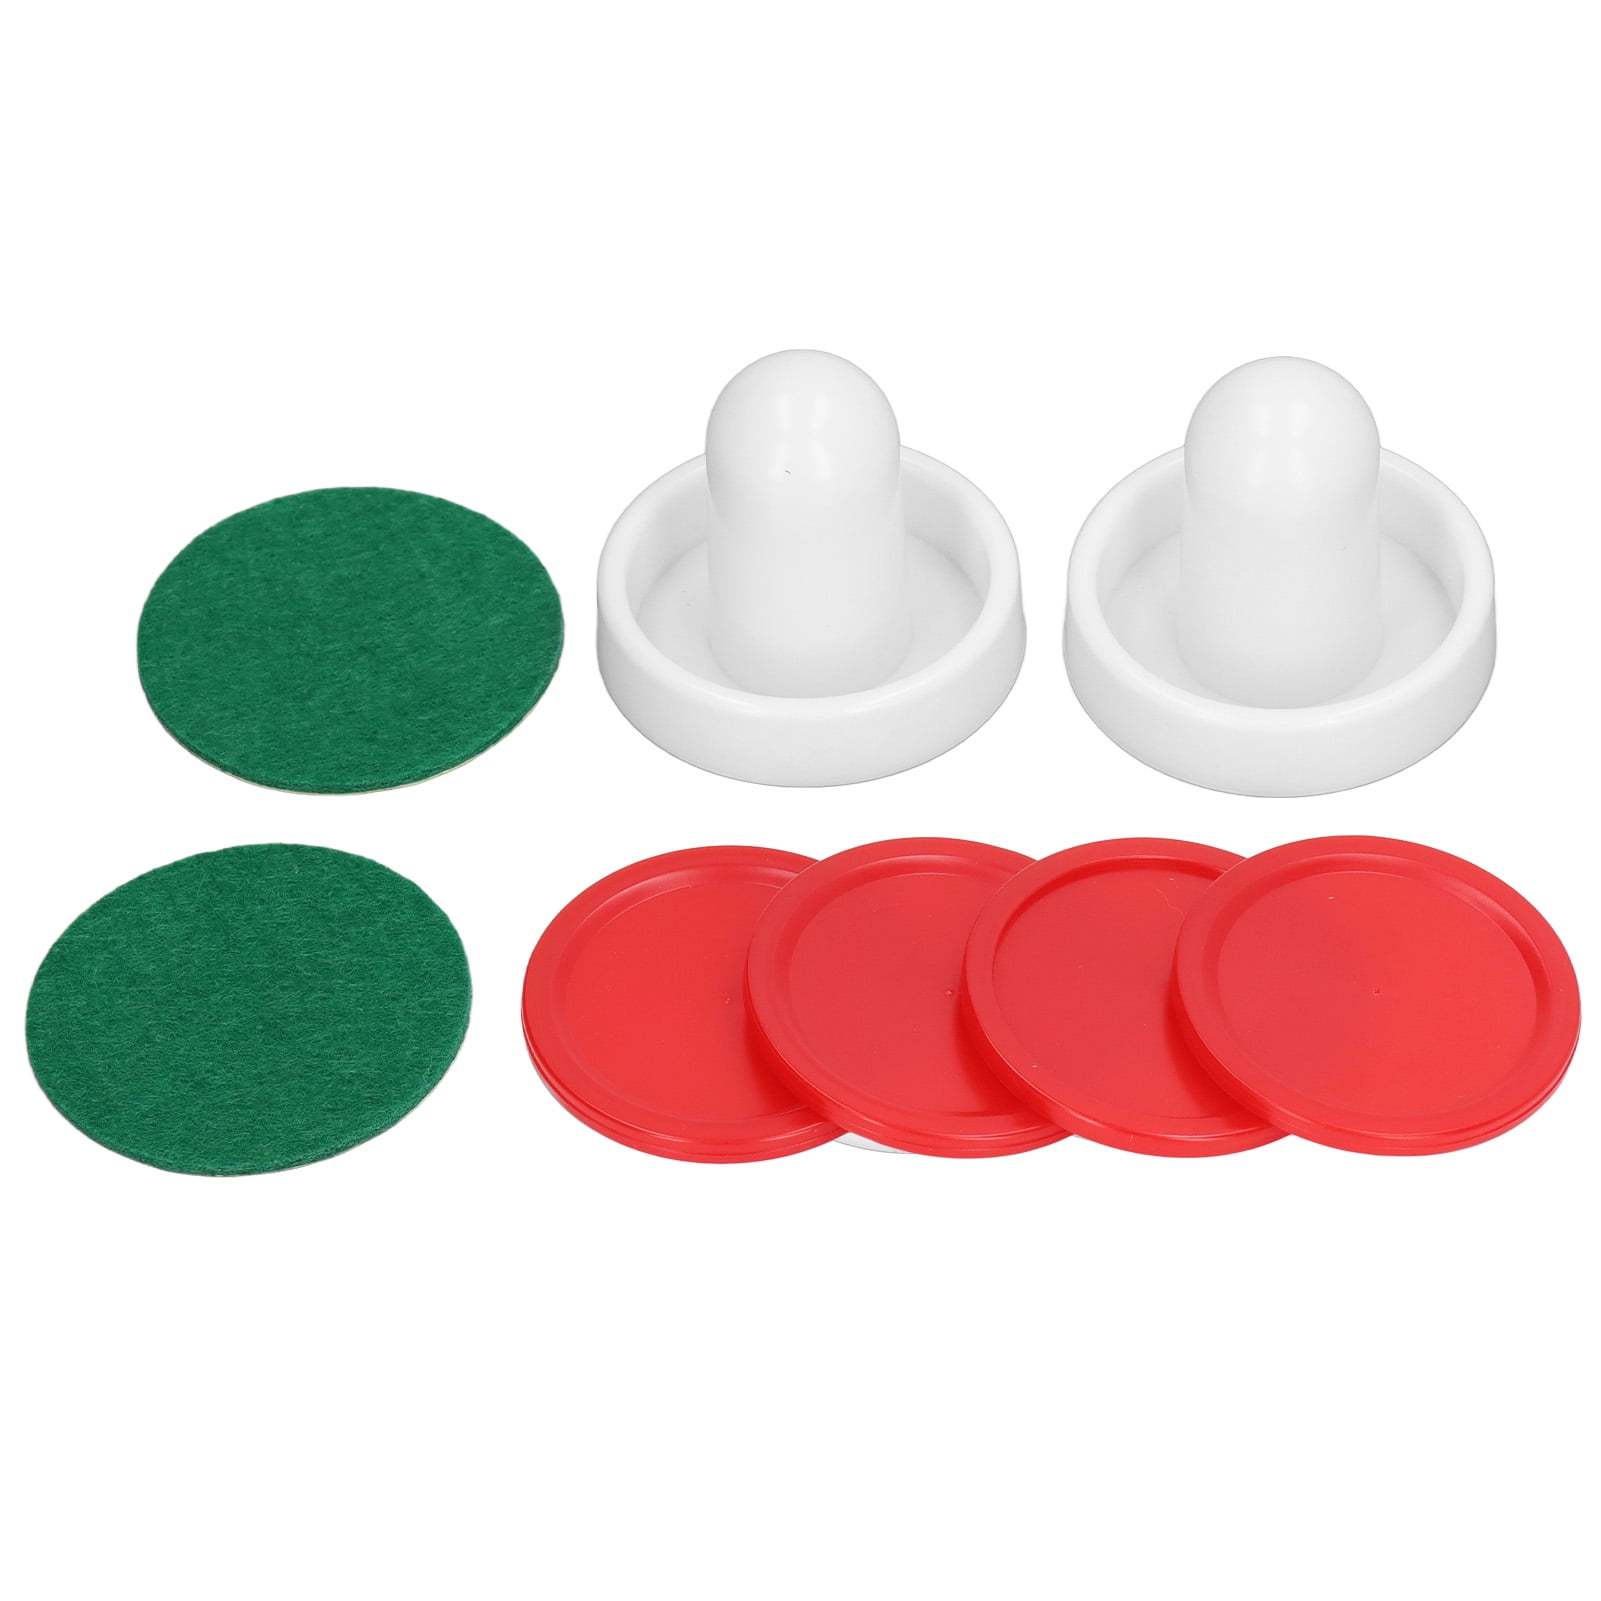 Table Air Hockey Improve Gaming Experience 8pcs Air Hockey Puck Thick Pad For Game Tables Type B - Walmart.com